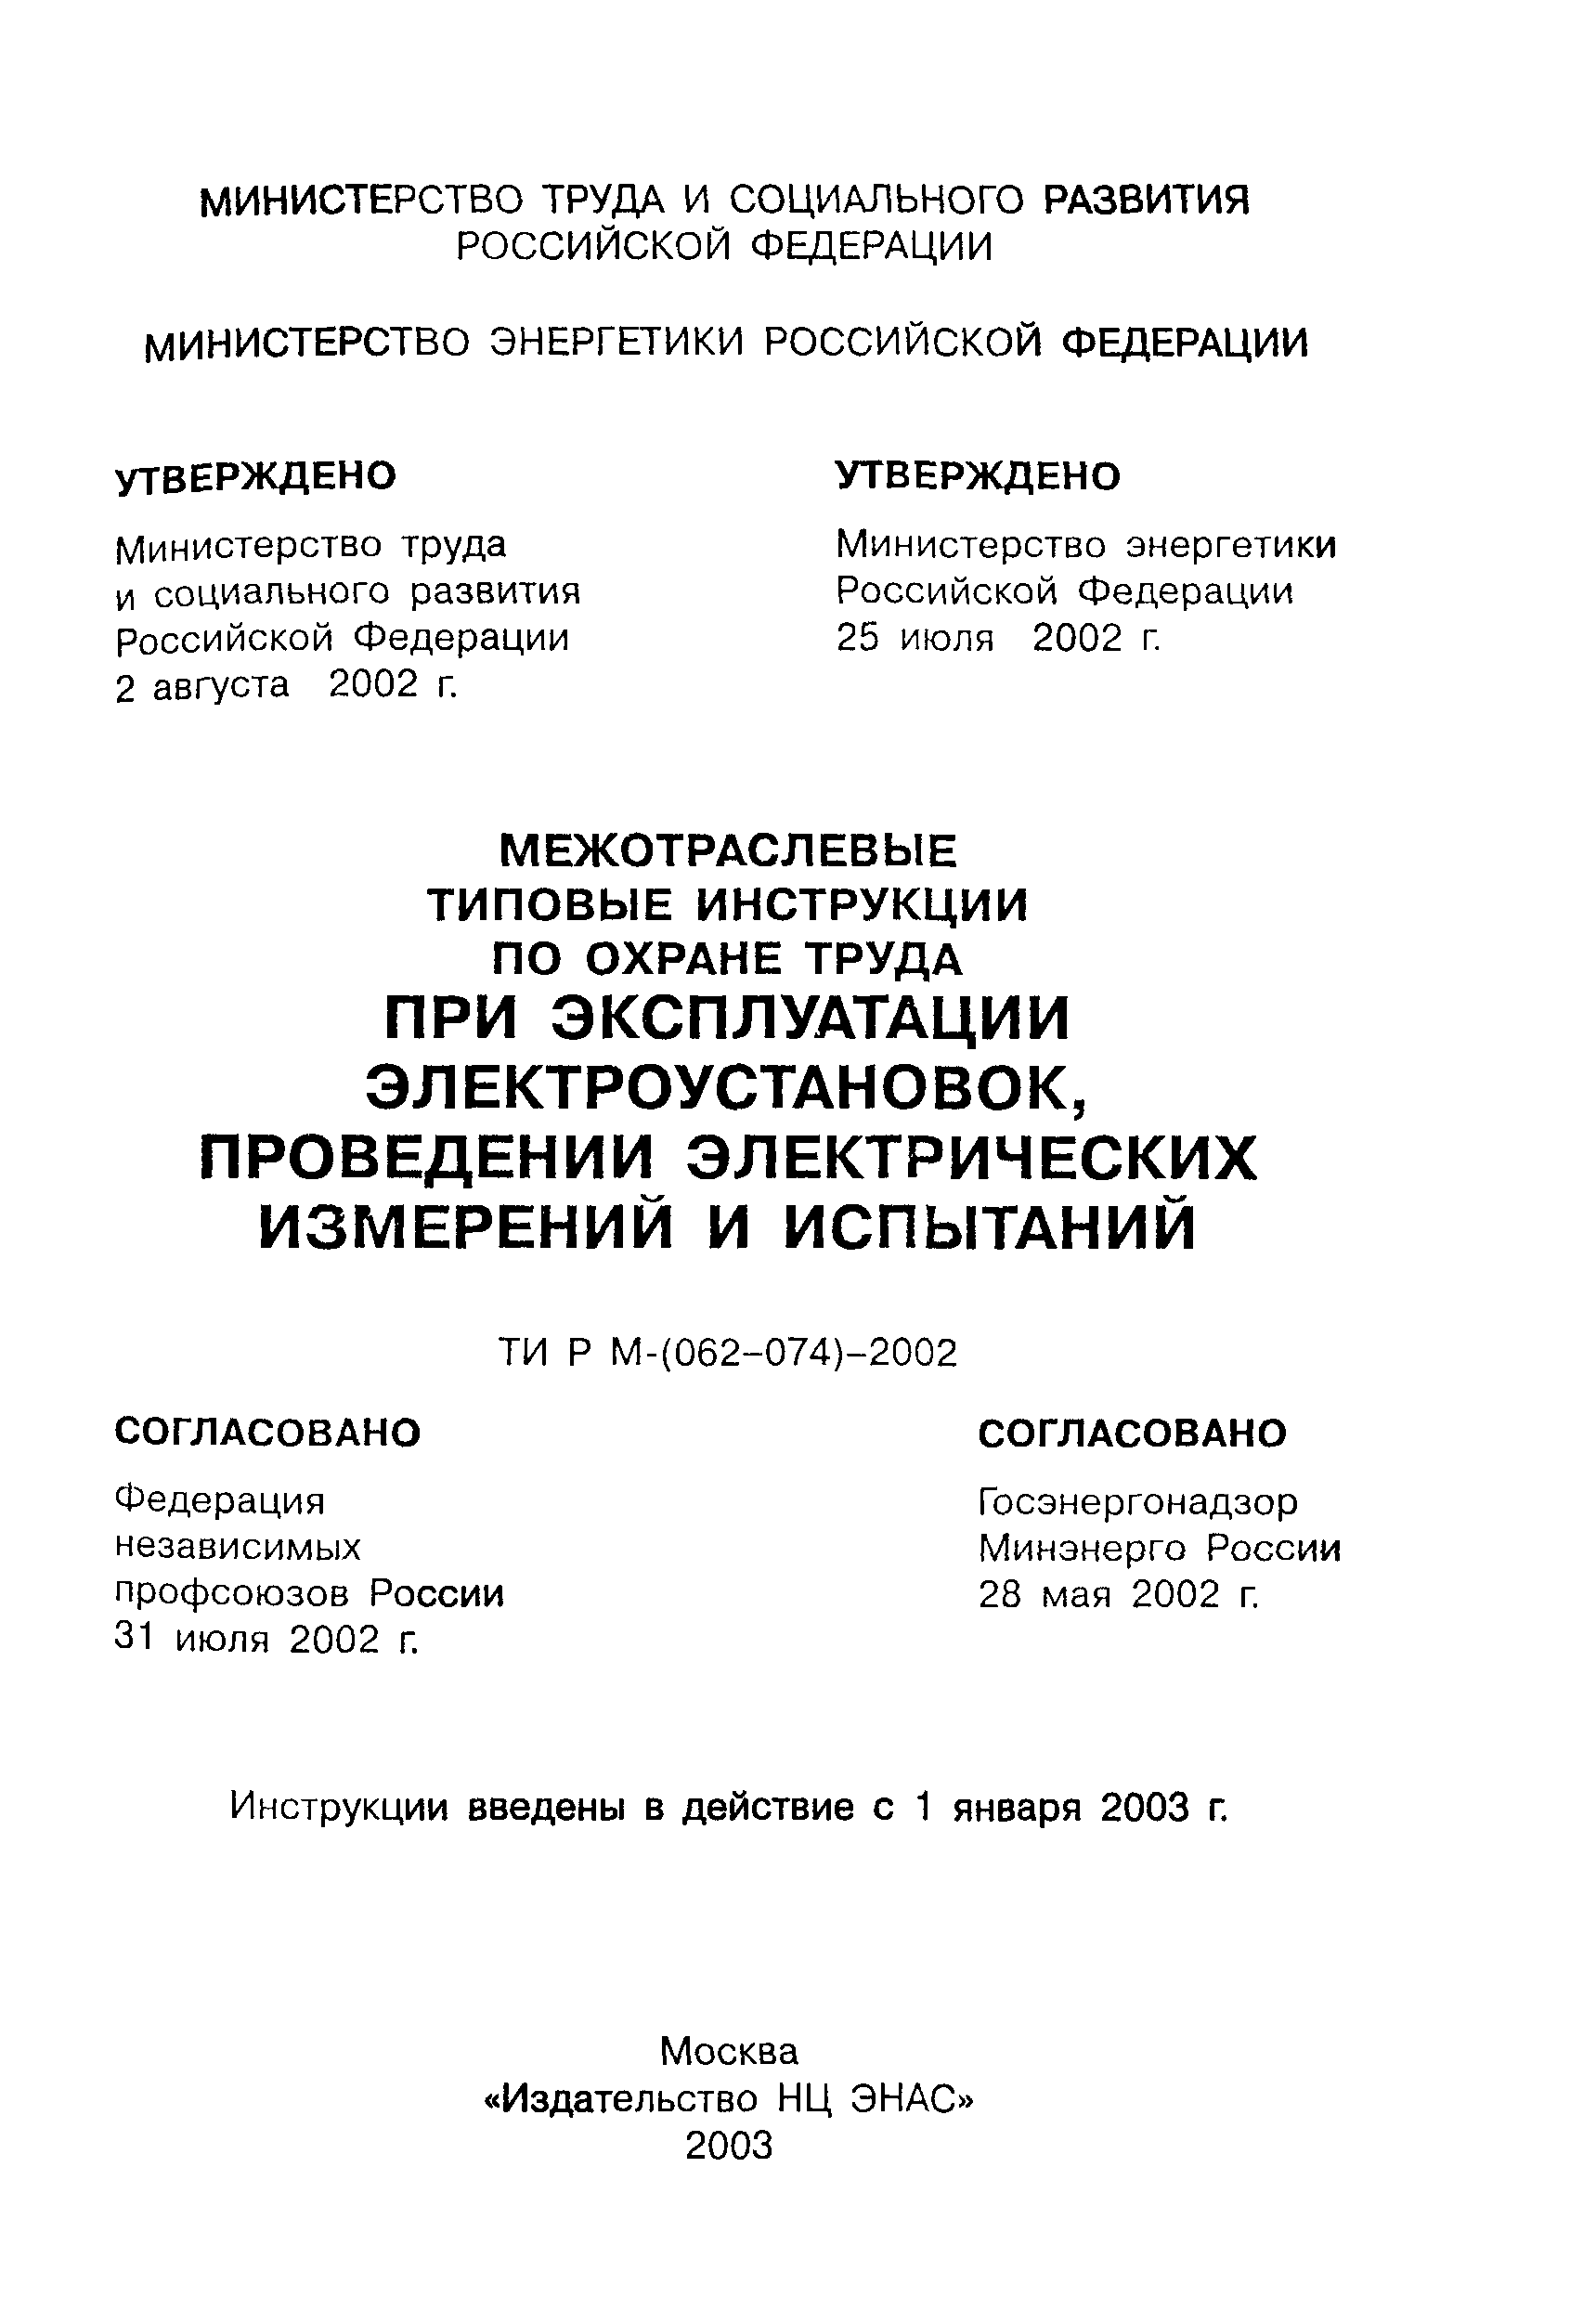 ТИ Р М-070-2002